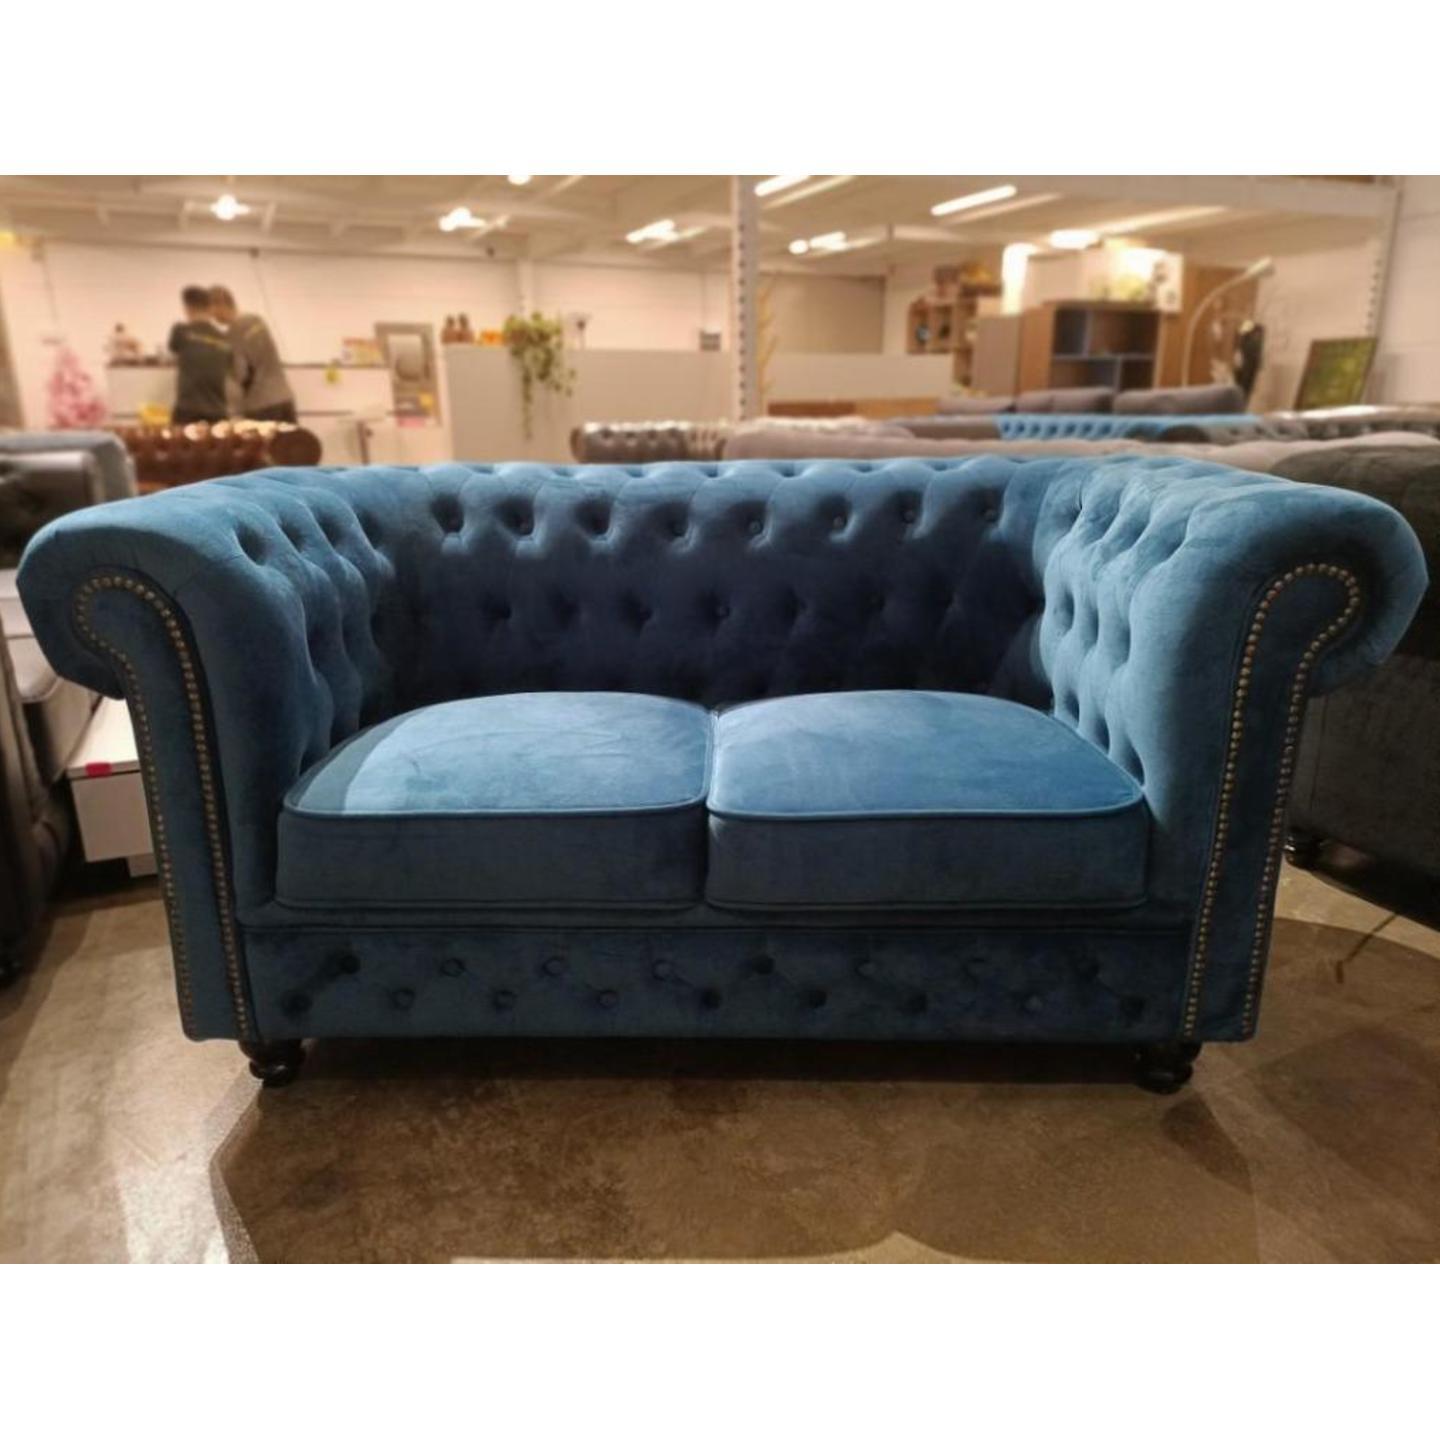 (PRE ORDER) SALVADORE X 2 Seater Chesterfield Sofa in MIDNIGHT BLUE VELVET - Estimated delivery by end August 2022